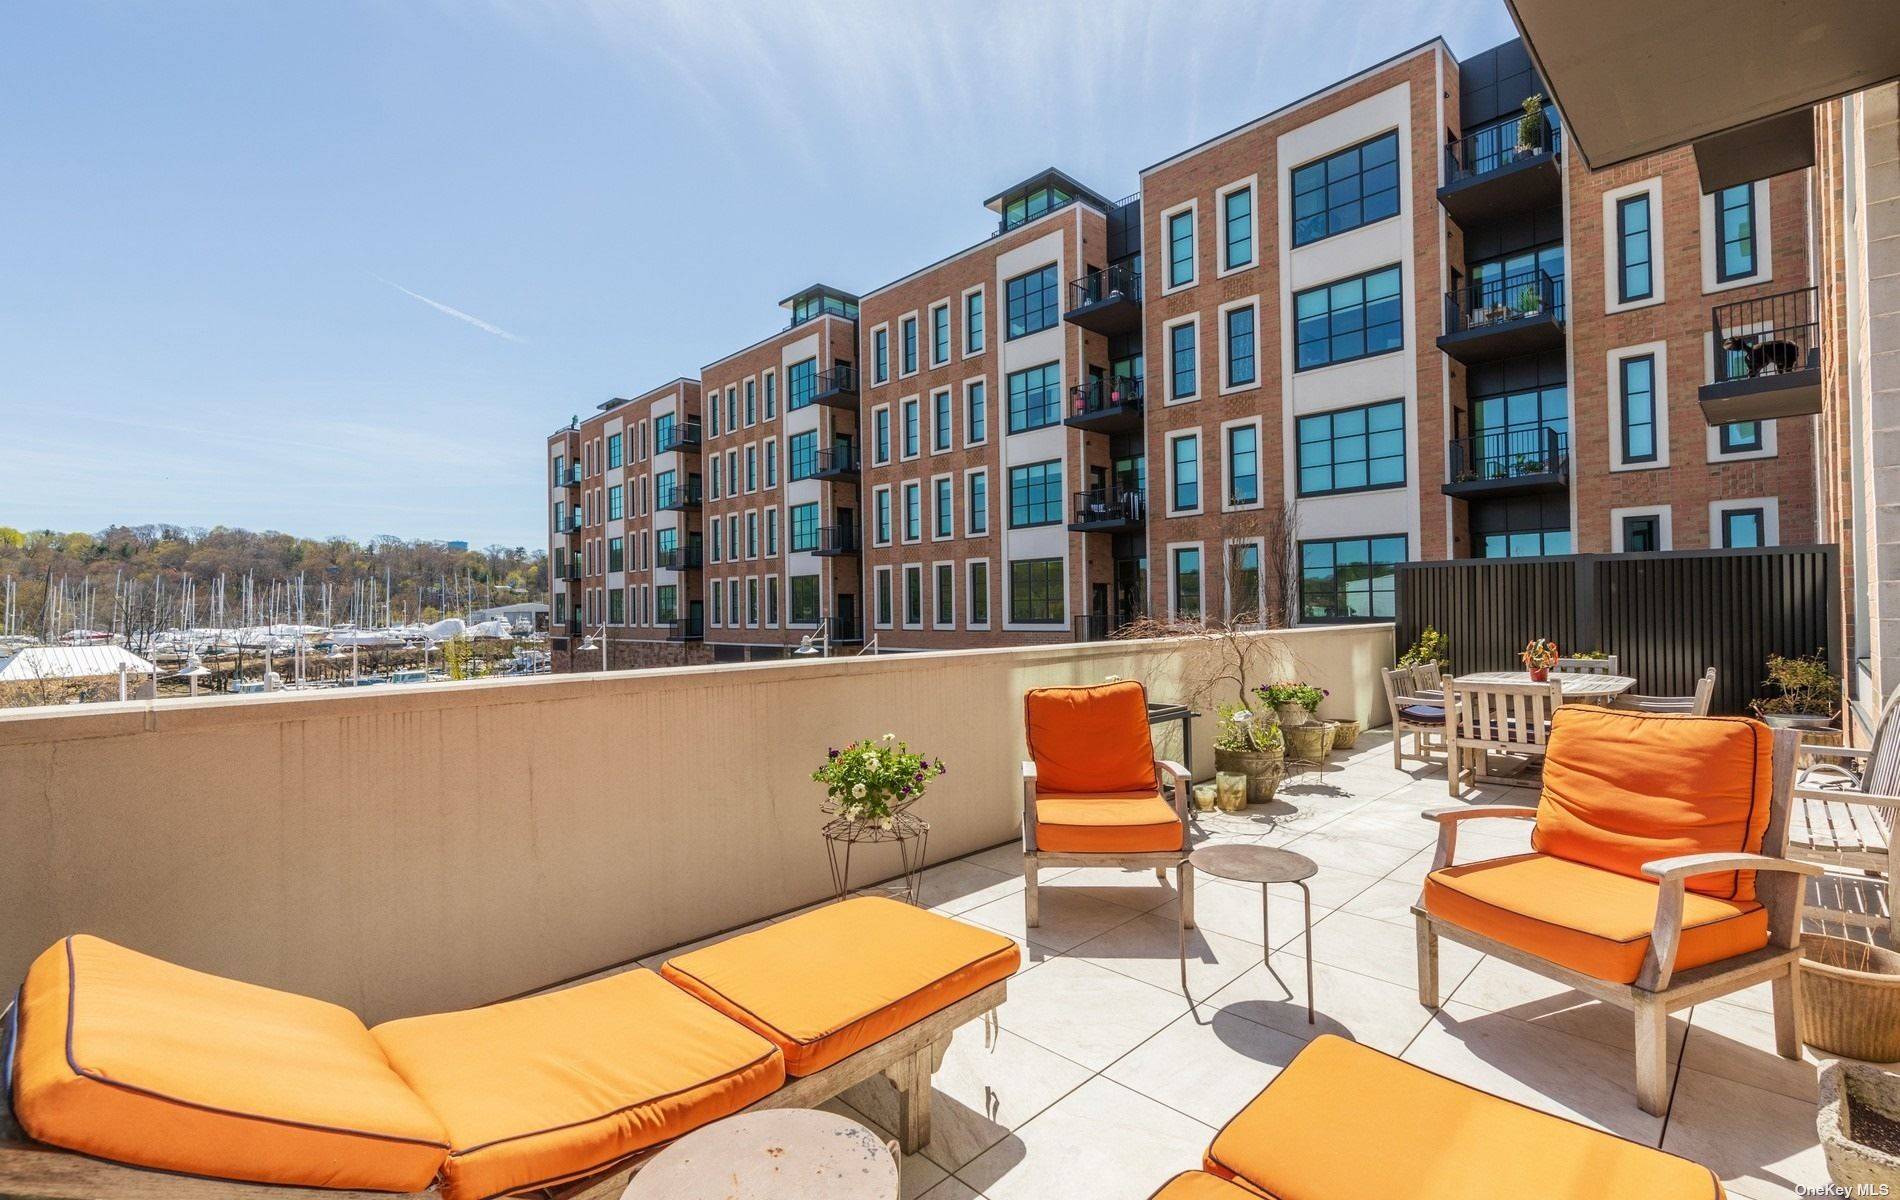 Better than new ! This luxurious condo offers the most spectacular outdoor living space rivaled by most other units and just in time for summer at this amenity filled waterfront ...